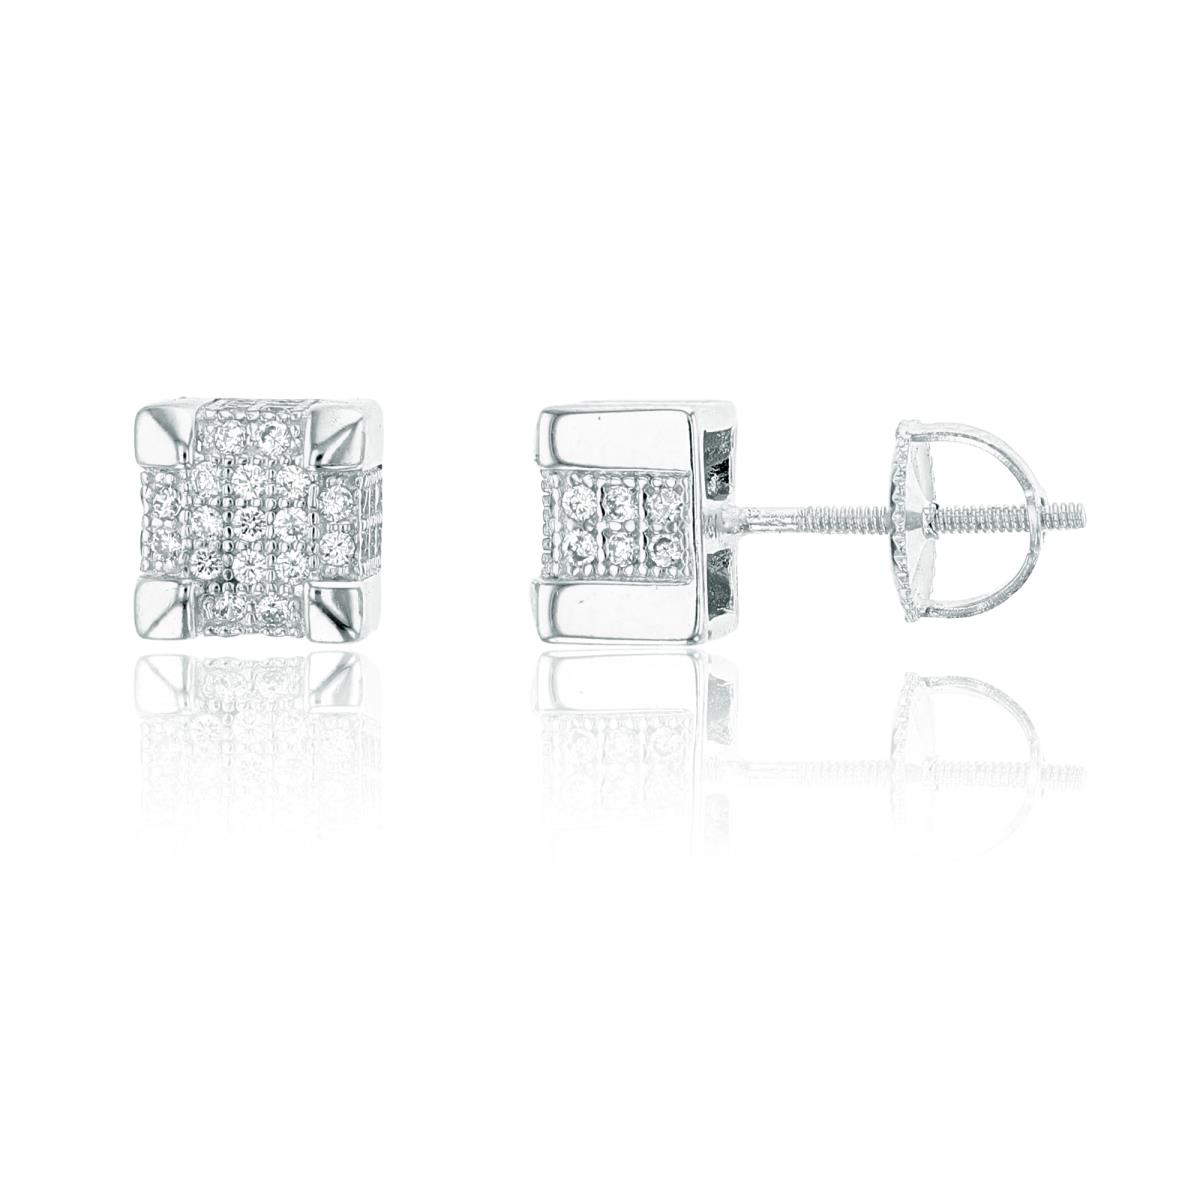 Sterling Silver 7x7mm Micropave Square Screwback Stud Earring